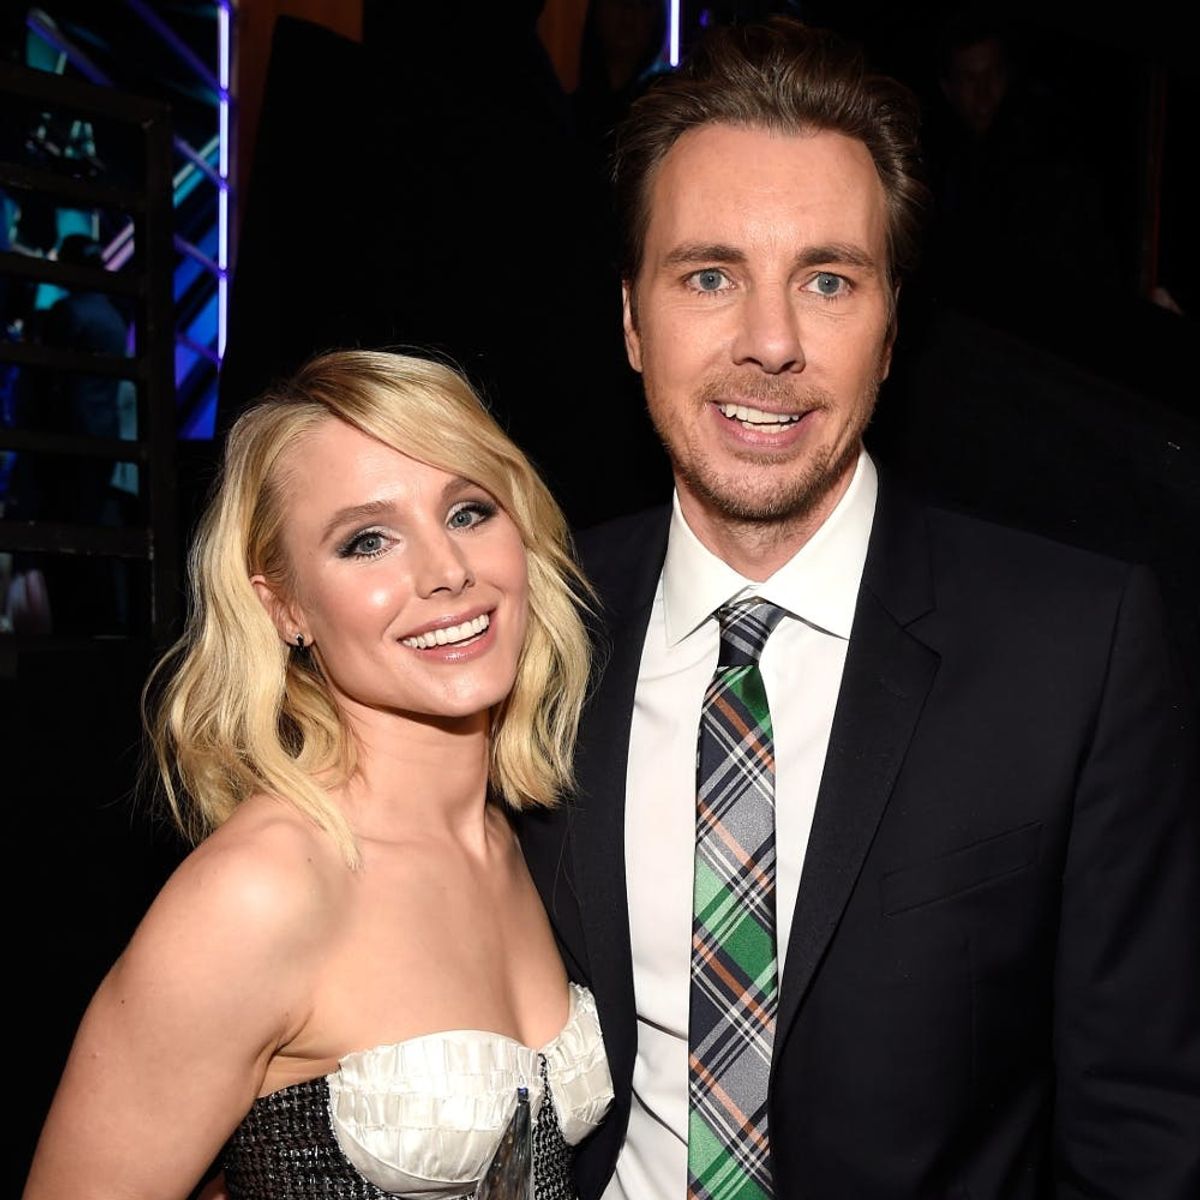 Dax Shepard Just Proved He’s the Coolest Hubby Ever by Helping His Wife Kristen Bell Meet Her Celeb Crush